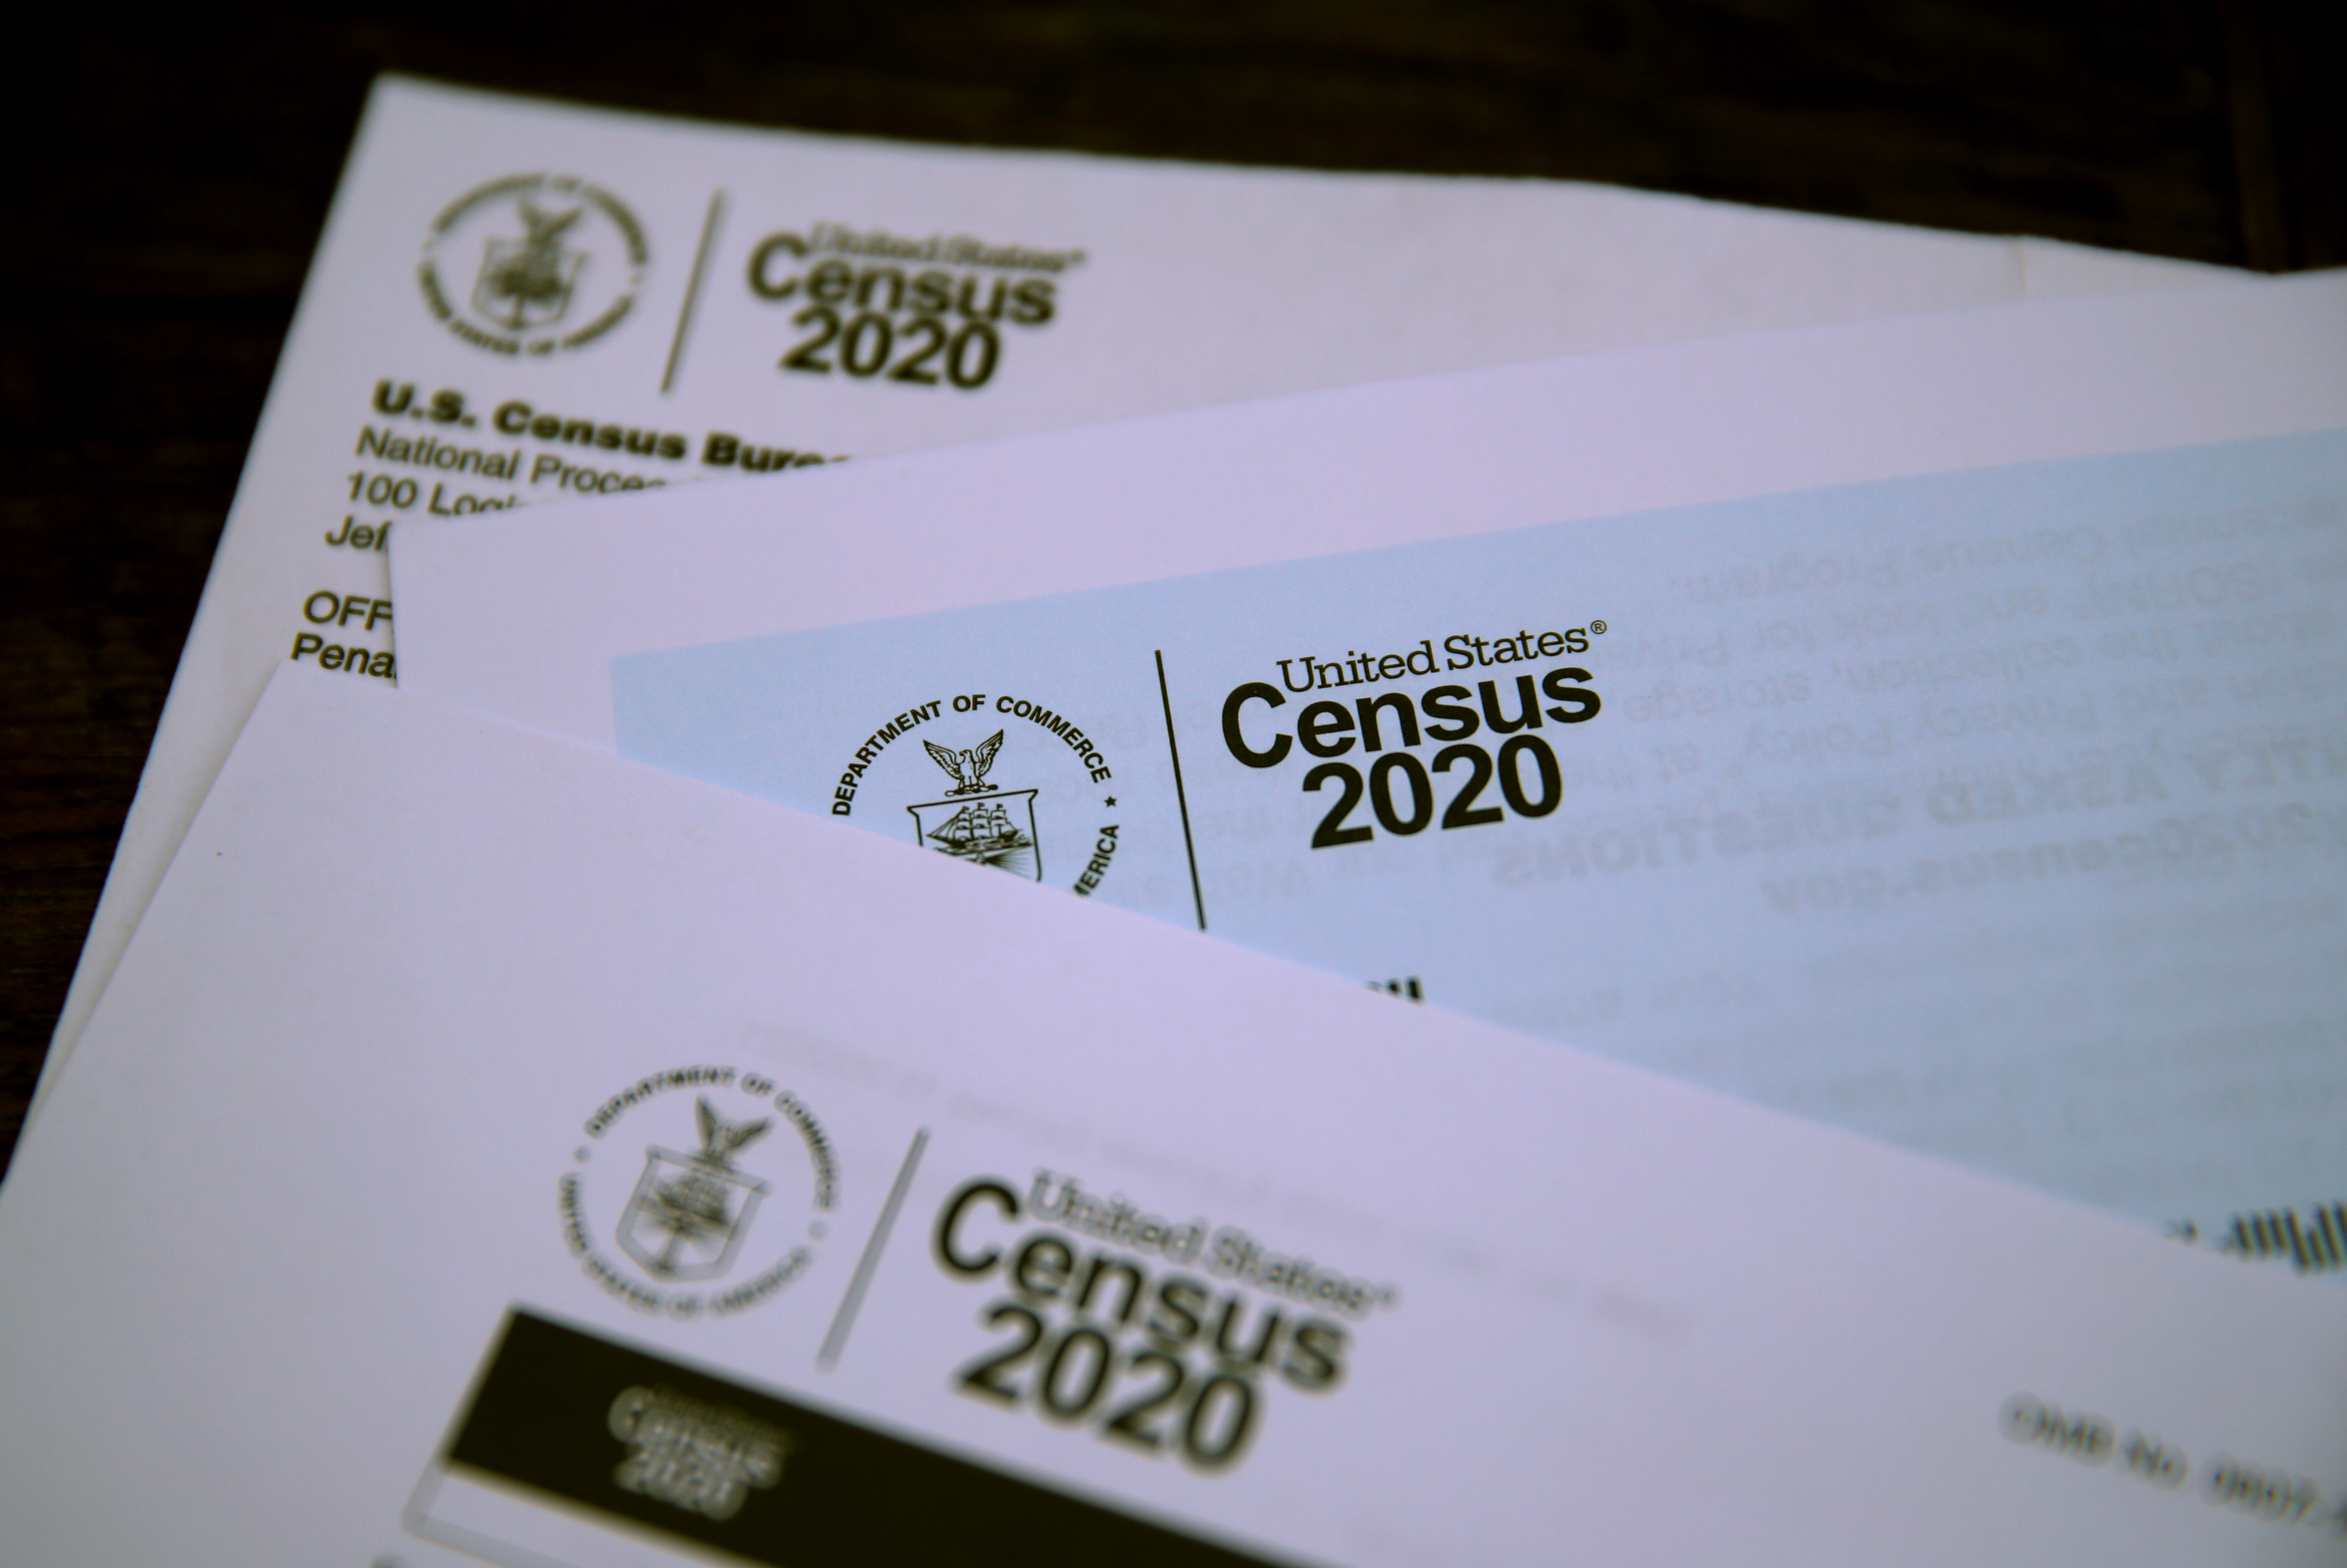 The U.S. Census logo appears on census materials received in the mail with an invitation to fill out census information online on March 19, 2020 in San Anselmo, California. Photo Illustration by Justin Sullivan/Getty Images